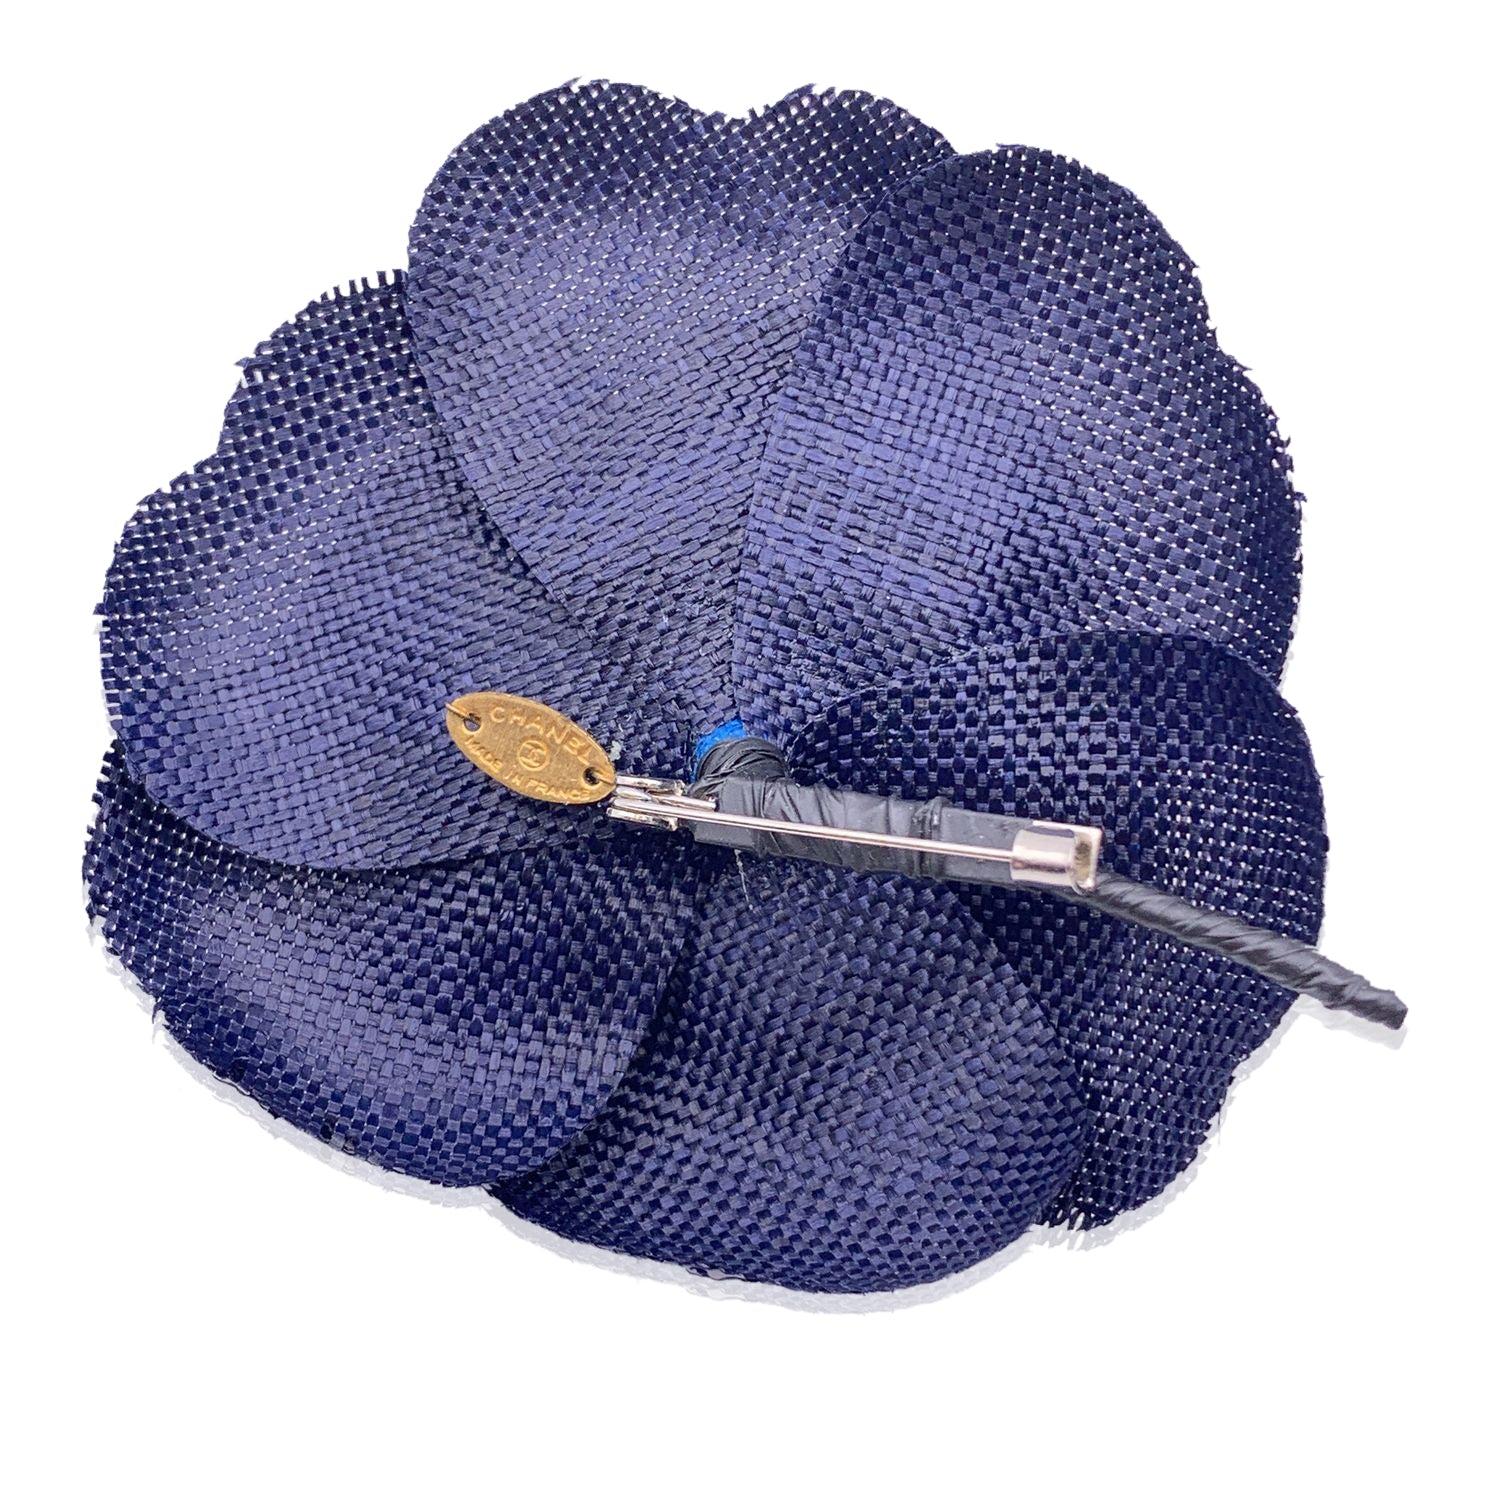 Chanel Vintage Camelia Camellia Flower Pin Brooch. Blue camellia petals. Safety pin closure. Diameter: 3 inches - 7.6 cm. 'CHANEL - CC - Made in France' oval tab on the back Condition A - EXCELLENT Gently used. Please check the photos carefully and